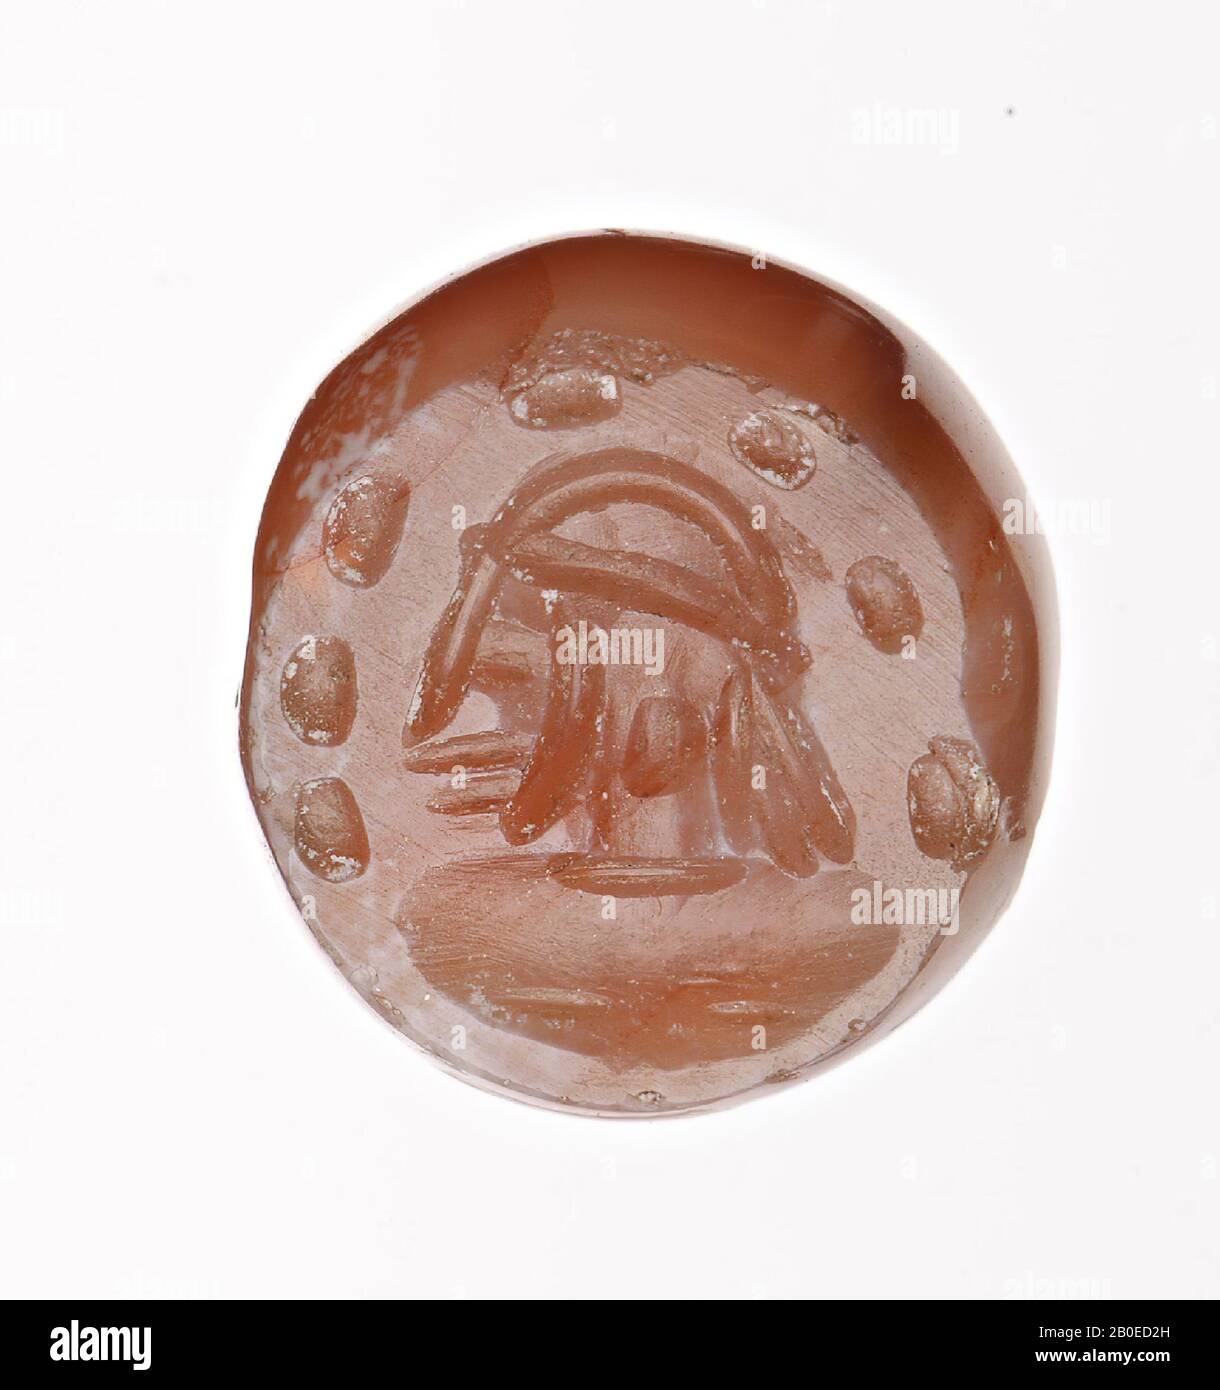 A dome-shaped stamp with an image of a male head with a hat, surrounded by 7 dots., Seal, stone, carnelian, D 1 cm, H 0.9 cm, D hole 0.1 cm, Iran Stock Photo